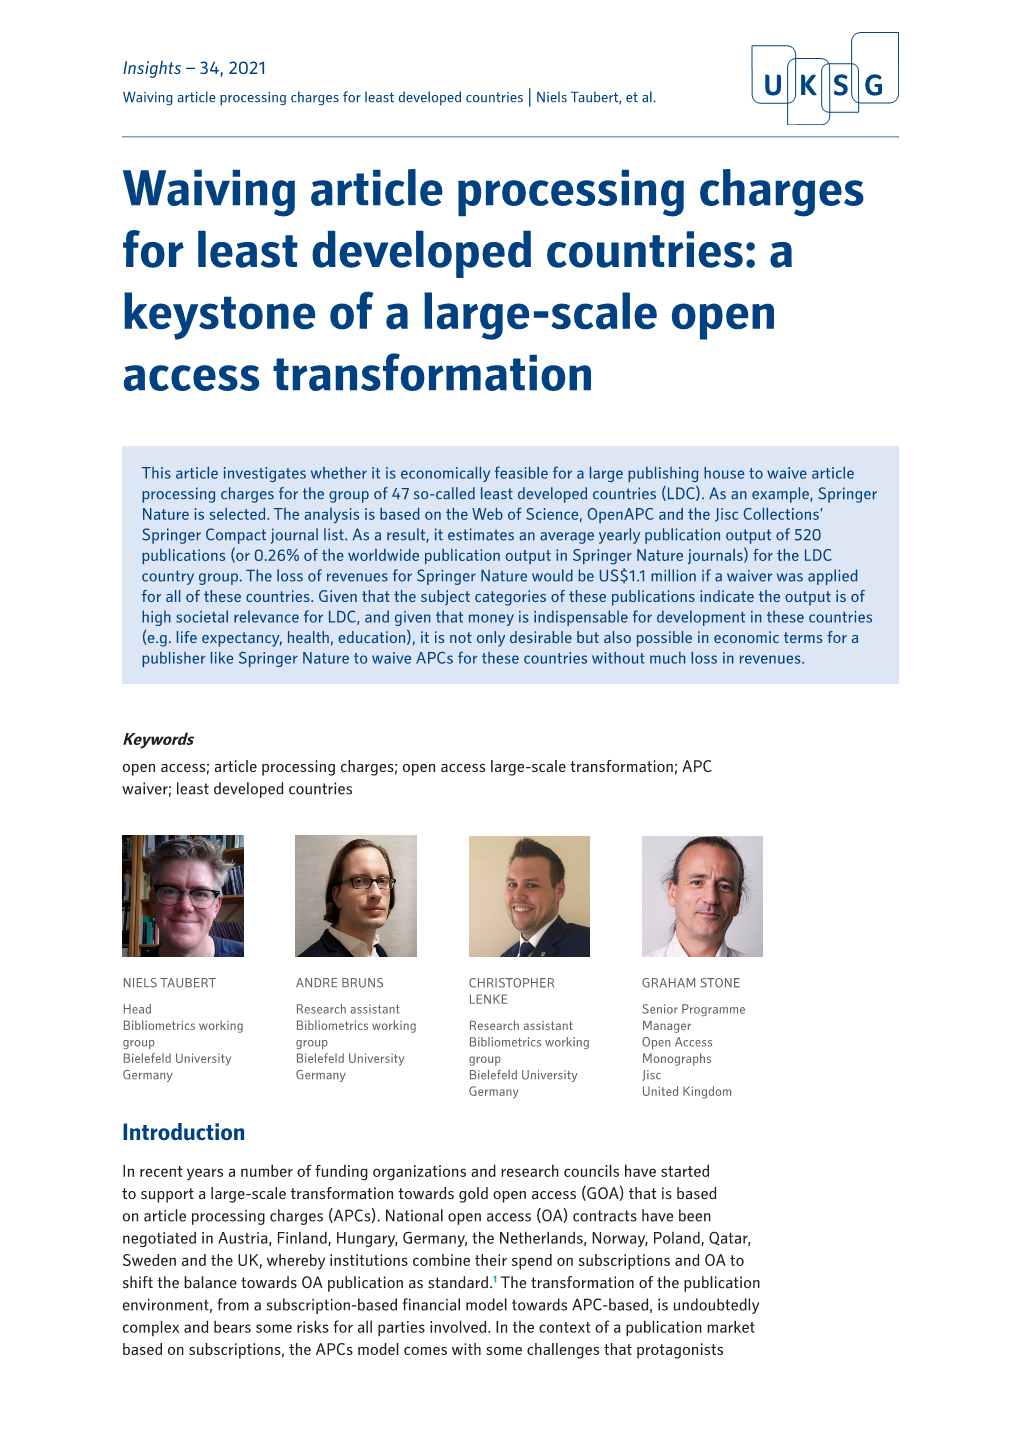 Waiving Article Processing Charges for Least Developed Countries | Niels Taubert, Et Al